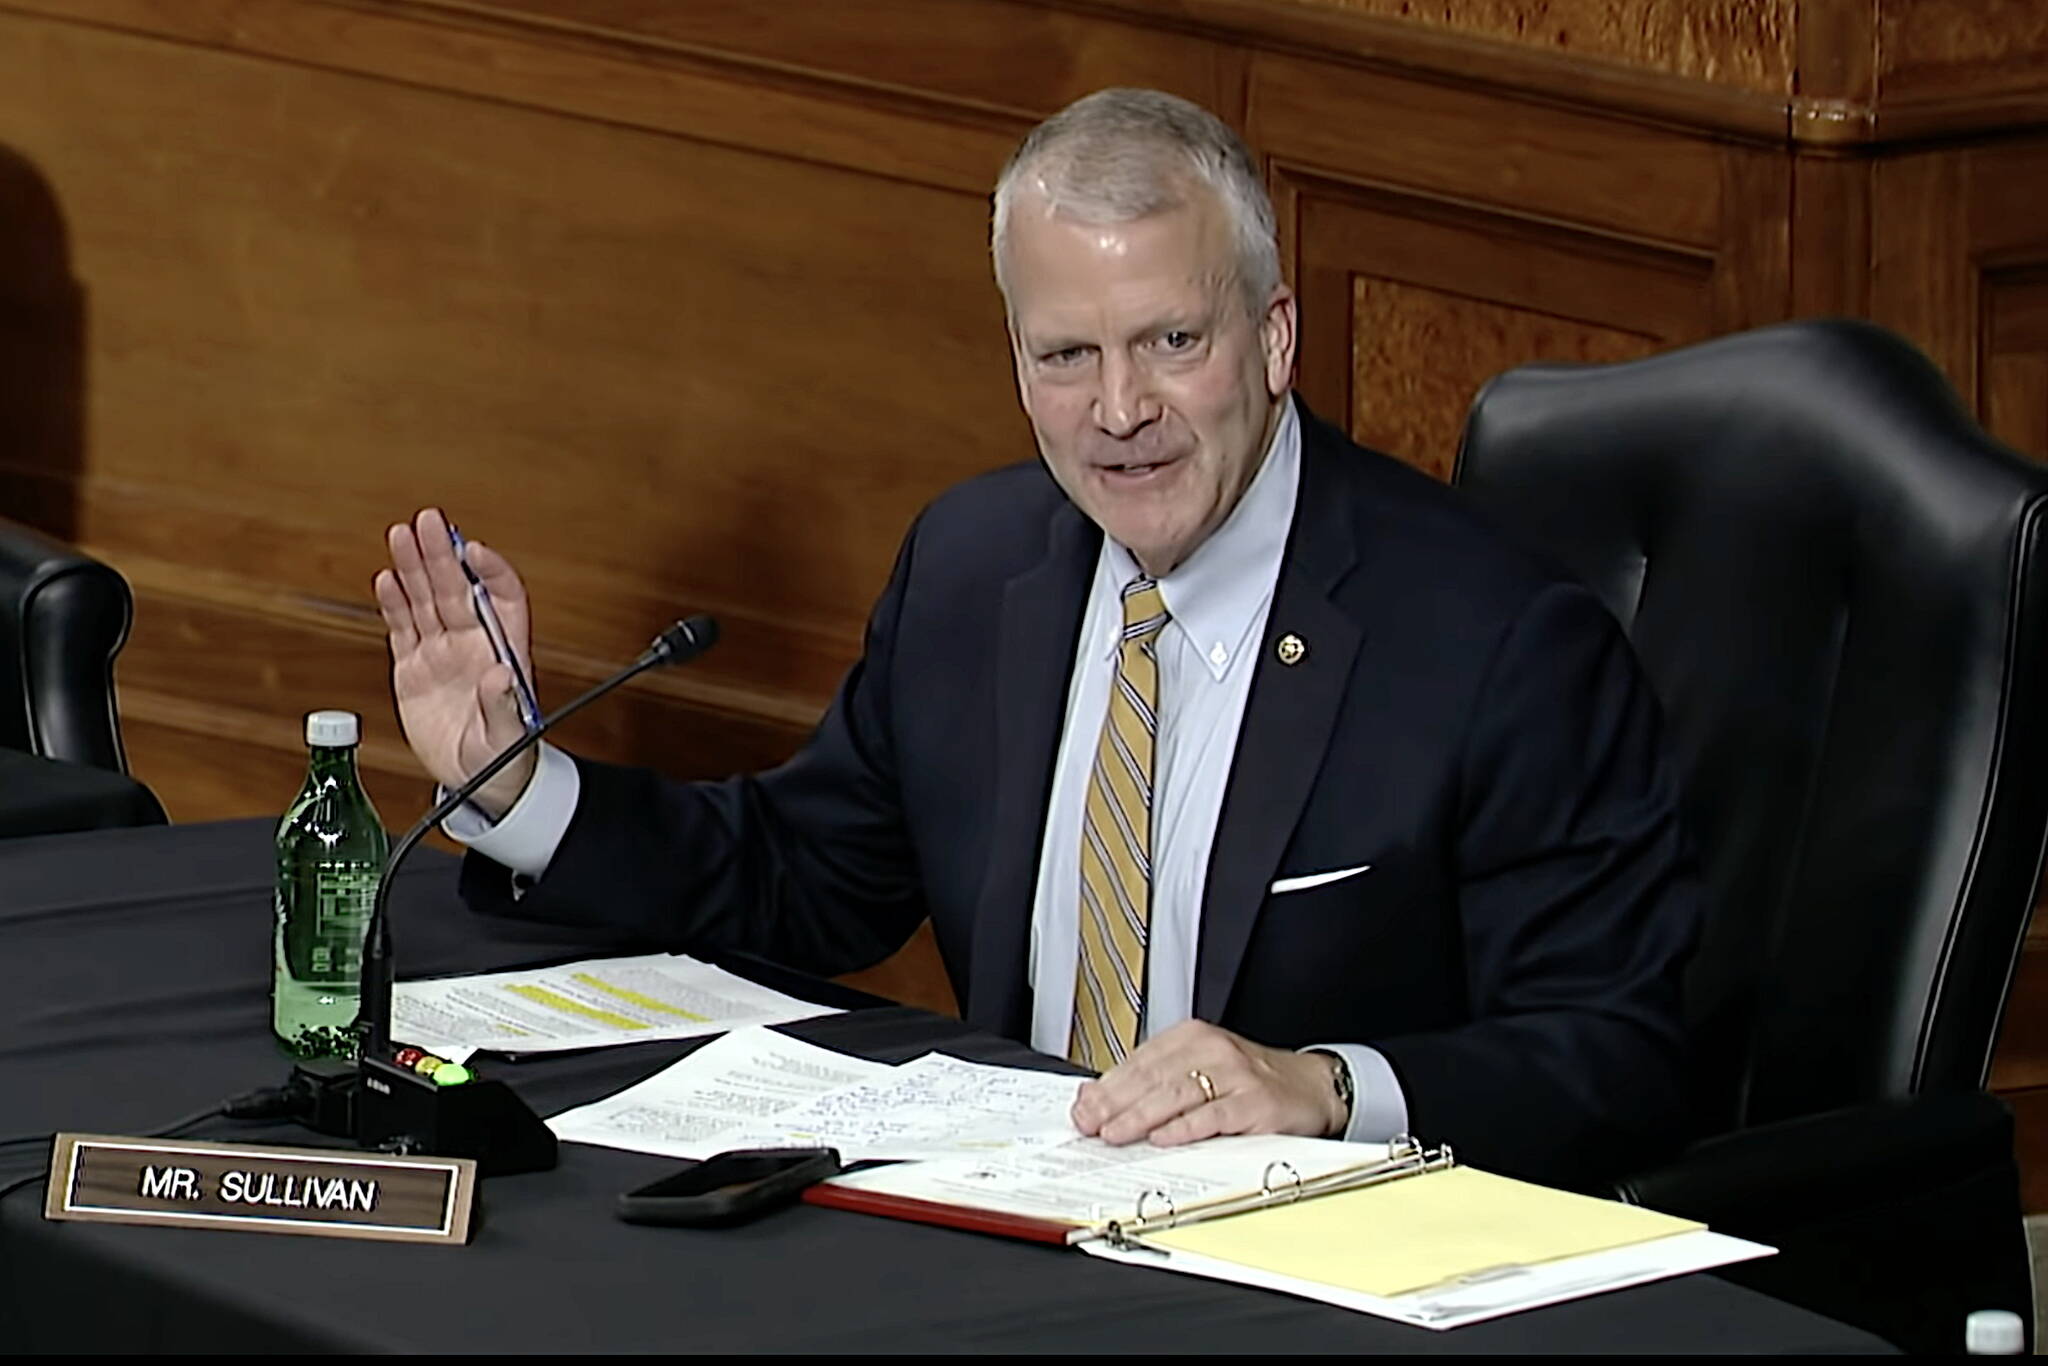 In this screenshot from official Senate video, U.S. Sen. Dan Sullivan, an Alaska Republican, discusses oil and gas policy during an Armed Services Committee meeting at the U.S. Capitol in May. (Screenshot)